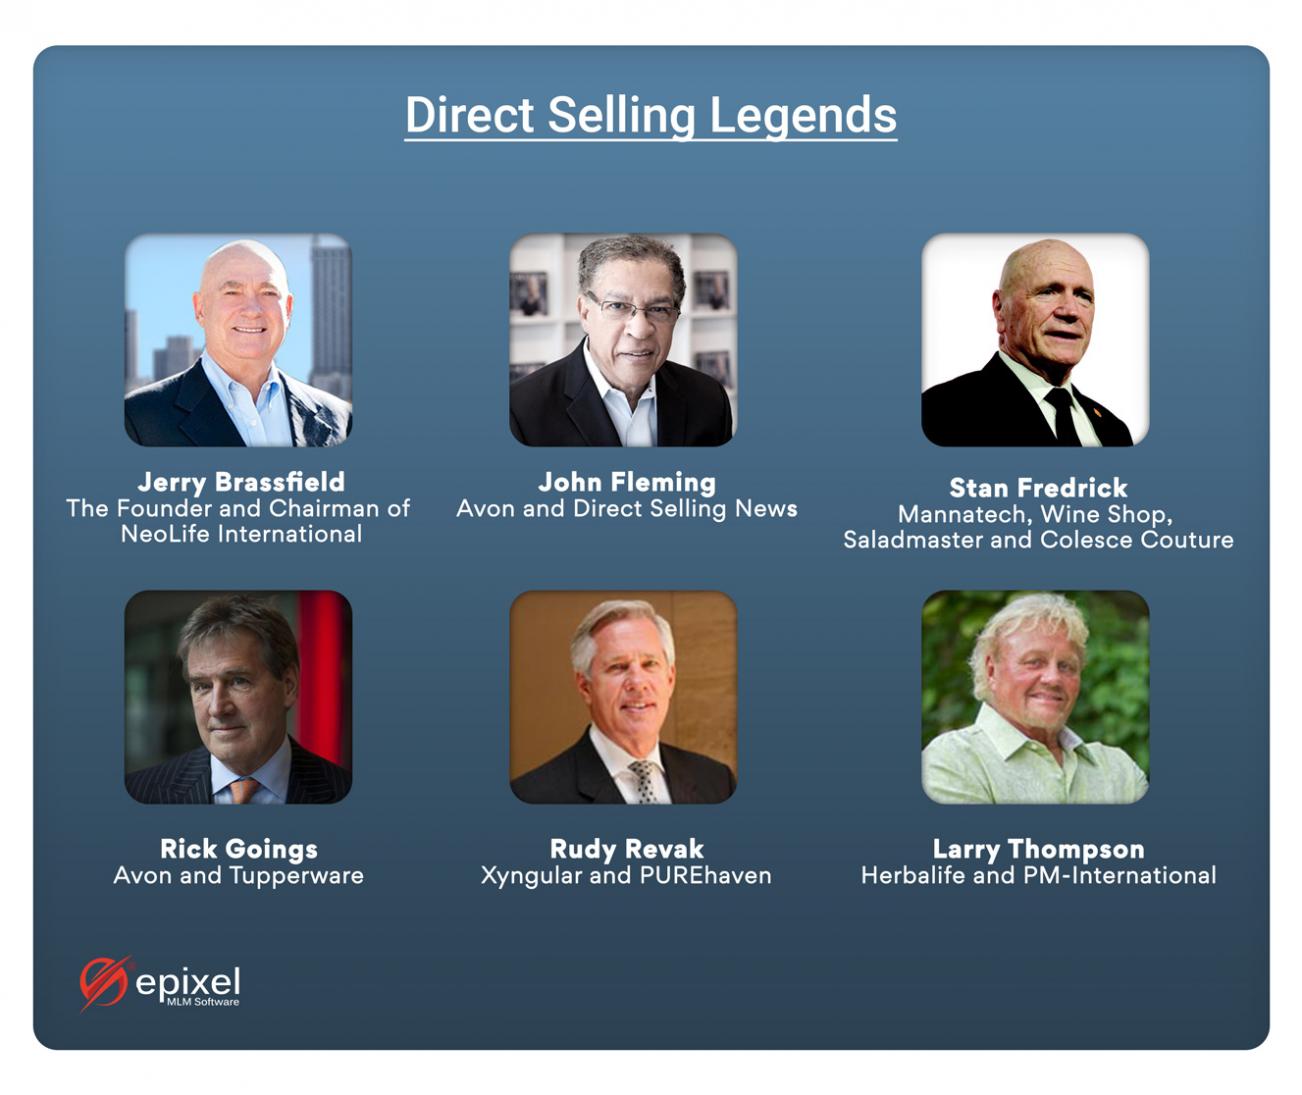 Legends in direct selling